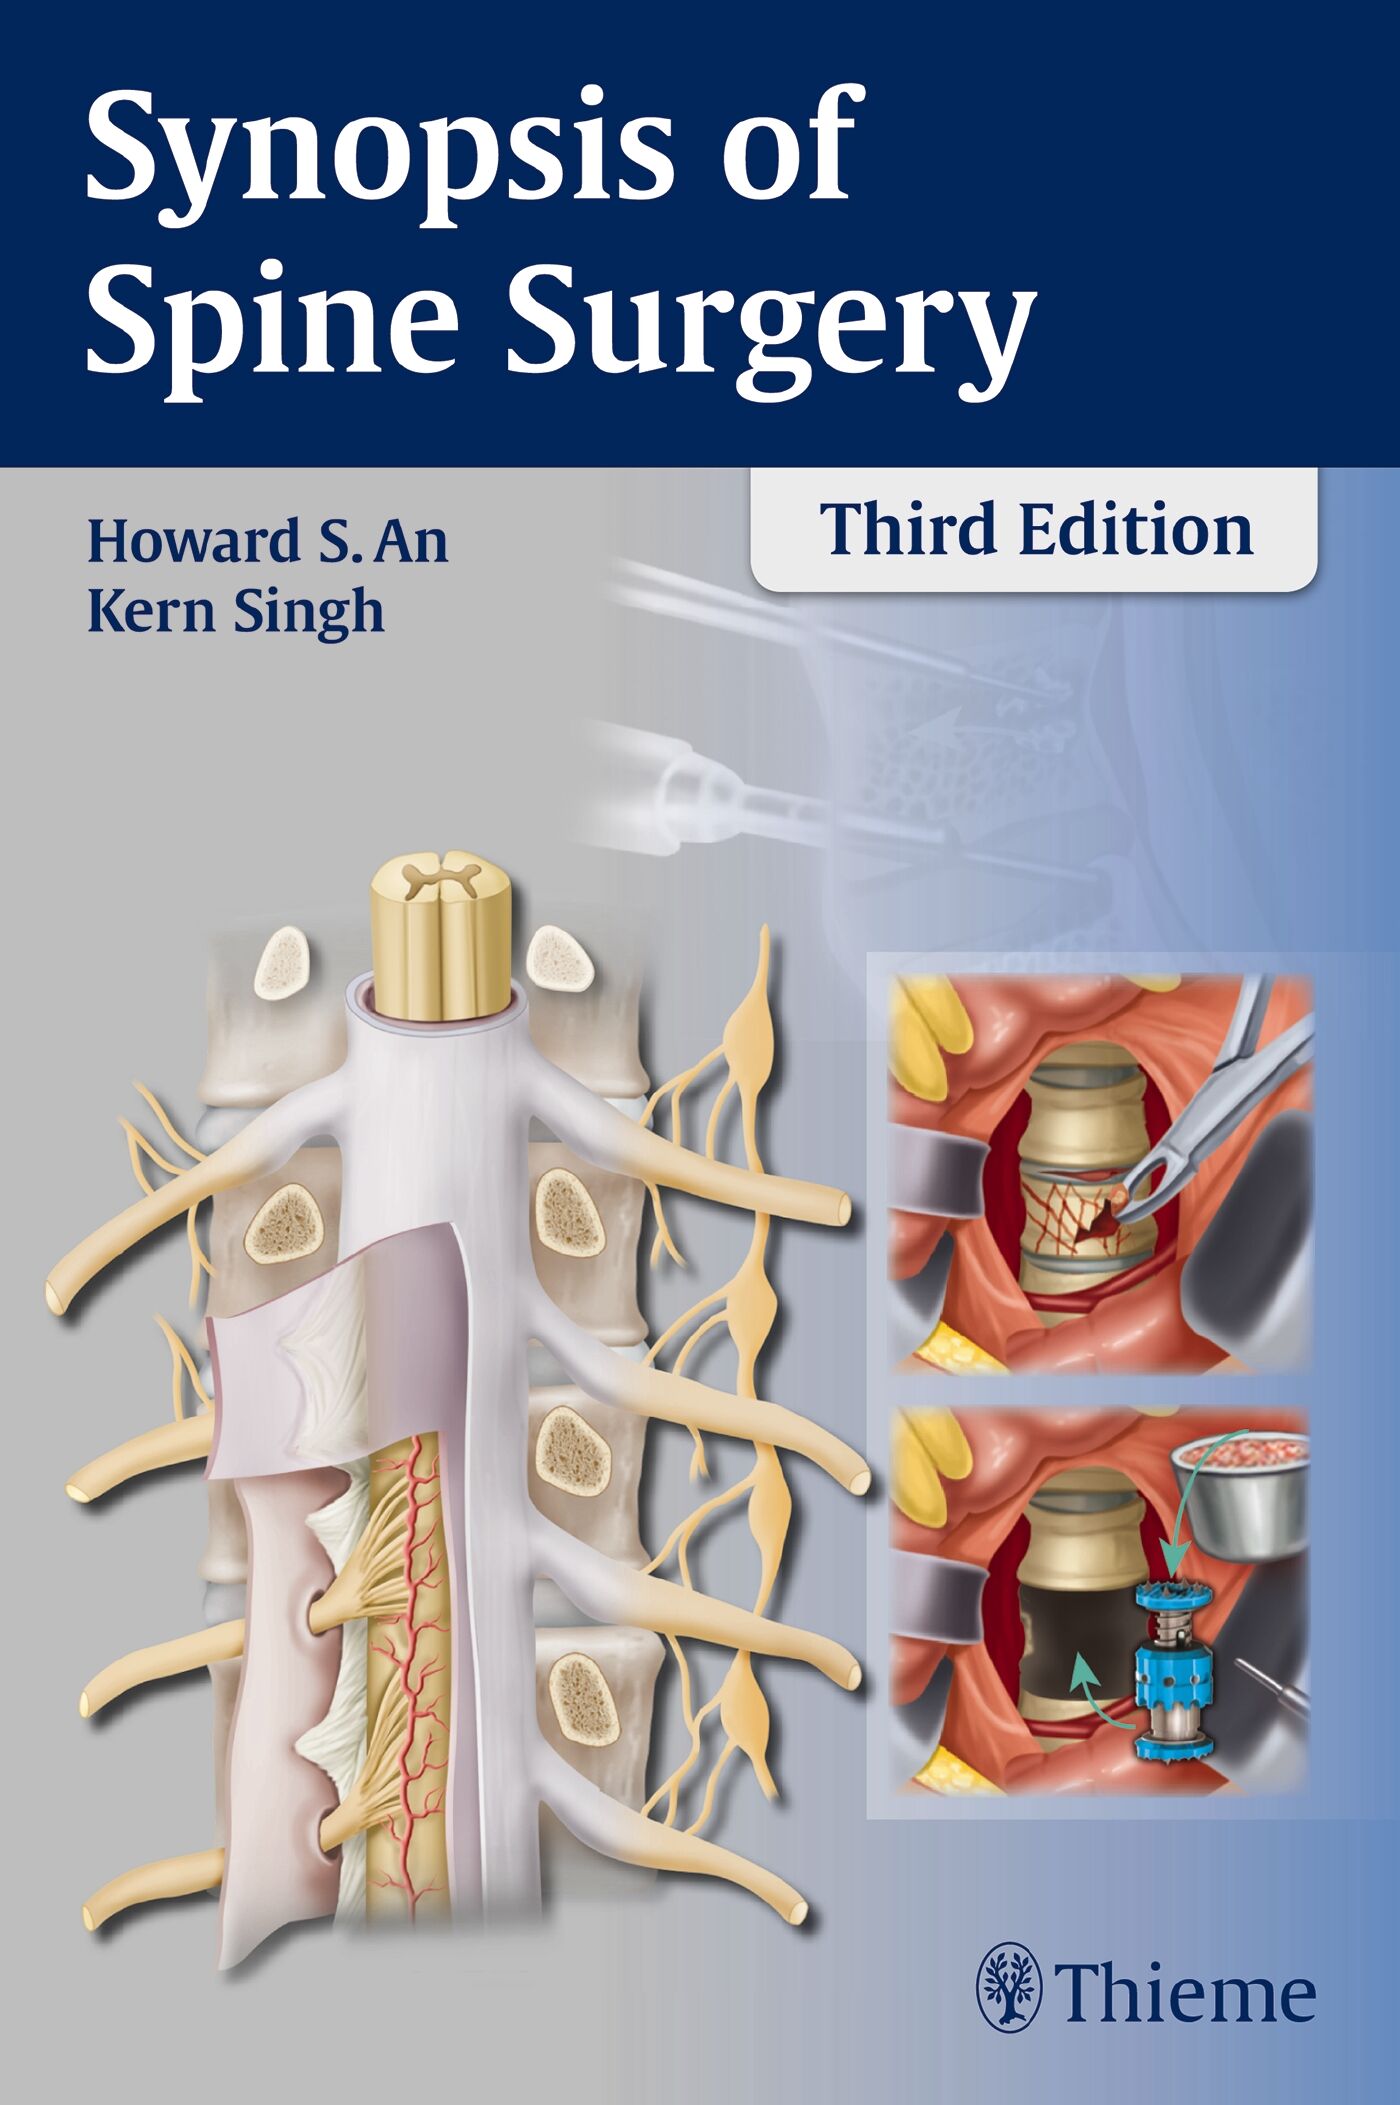 Synopsis of Spine Surgery, 9781626230309